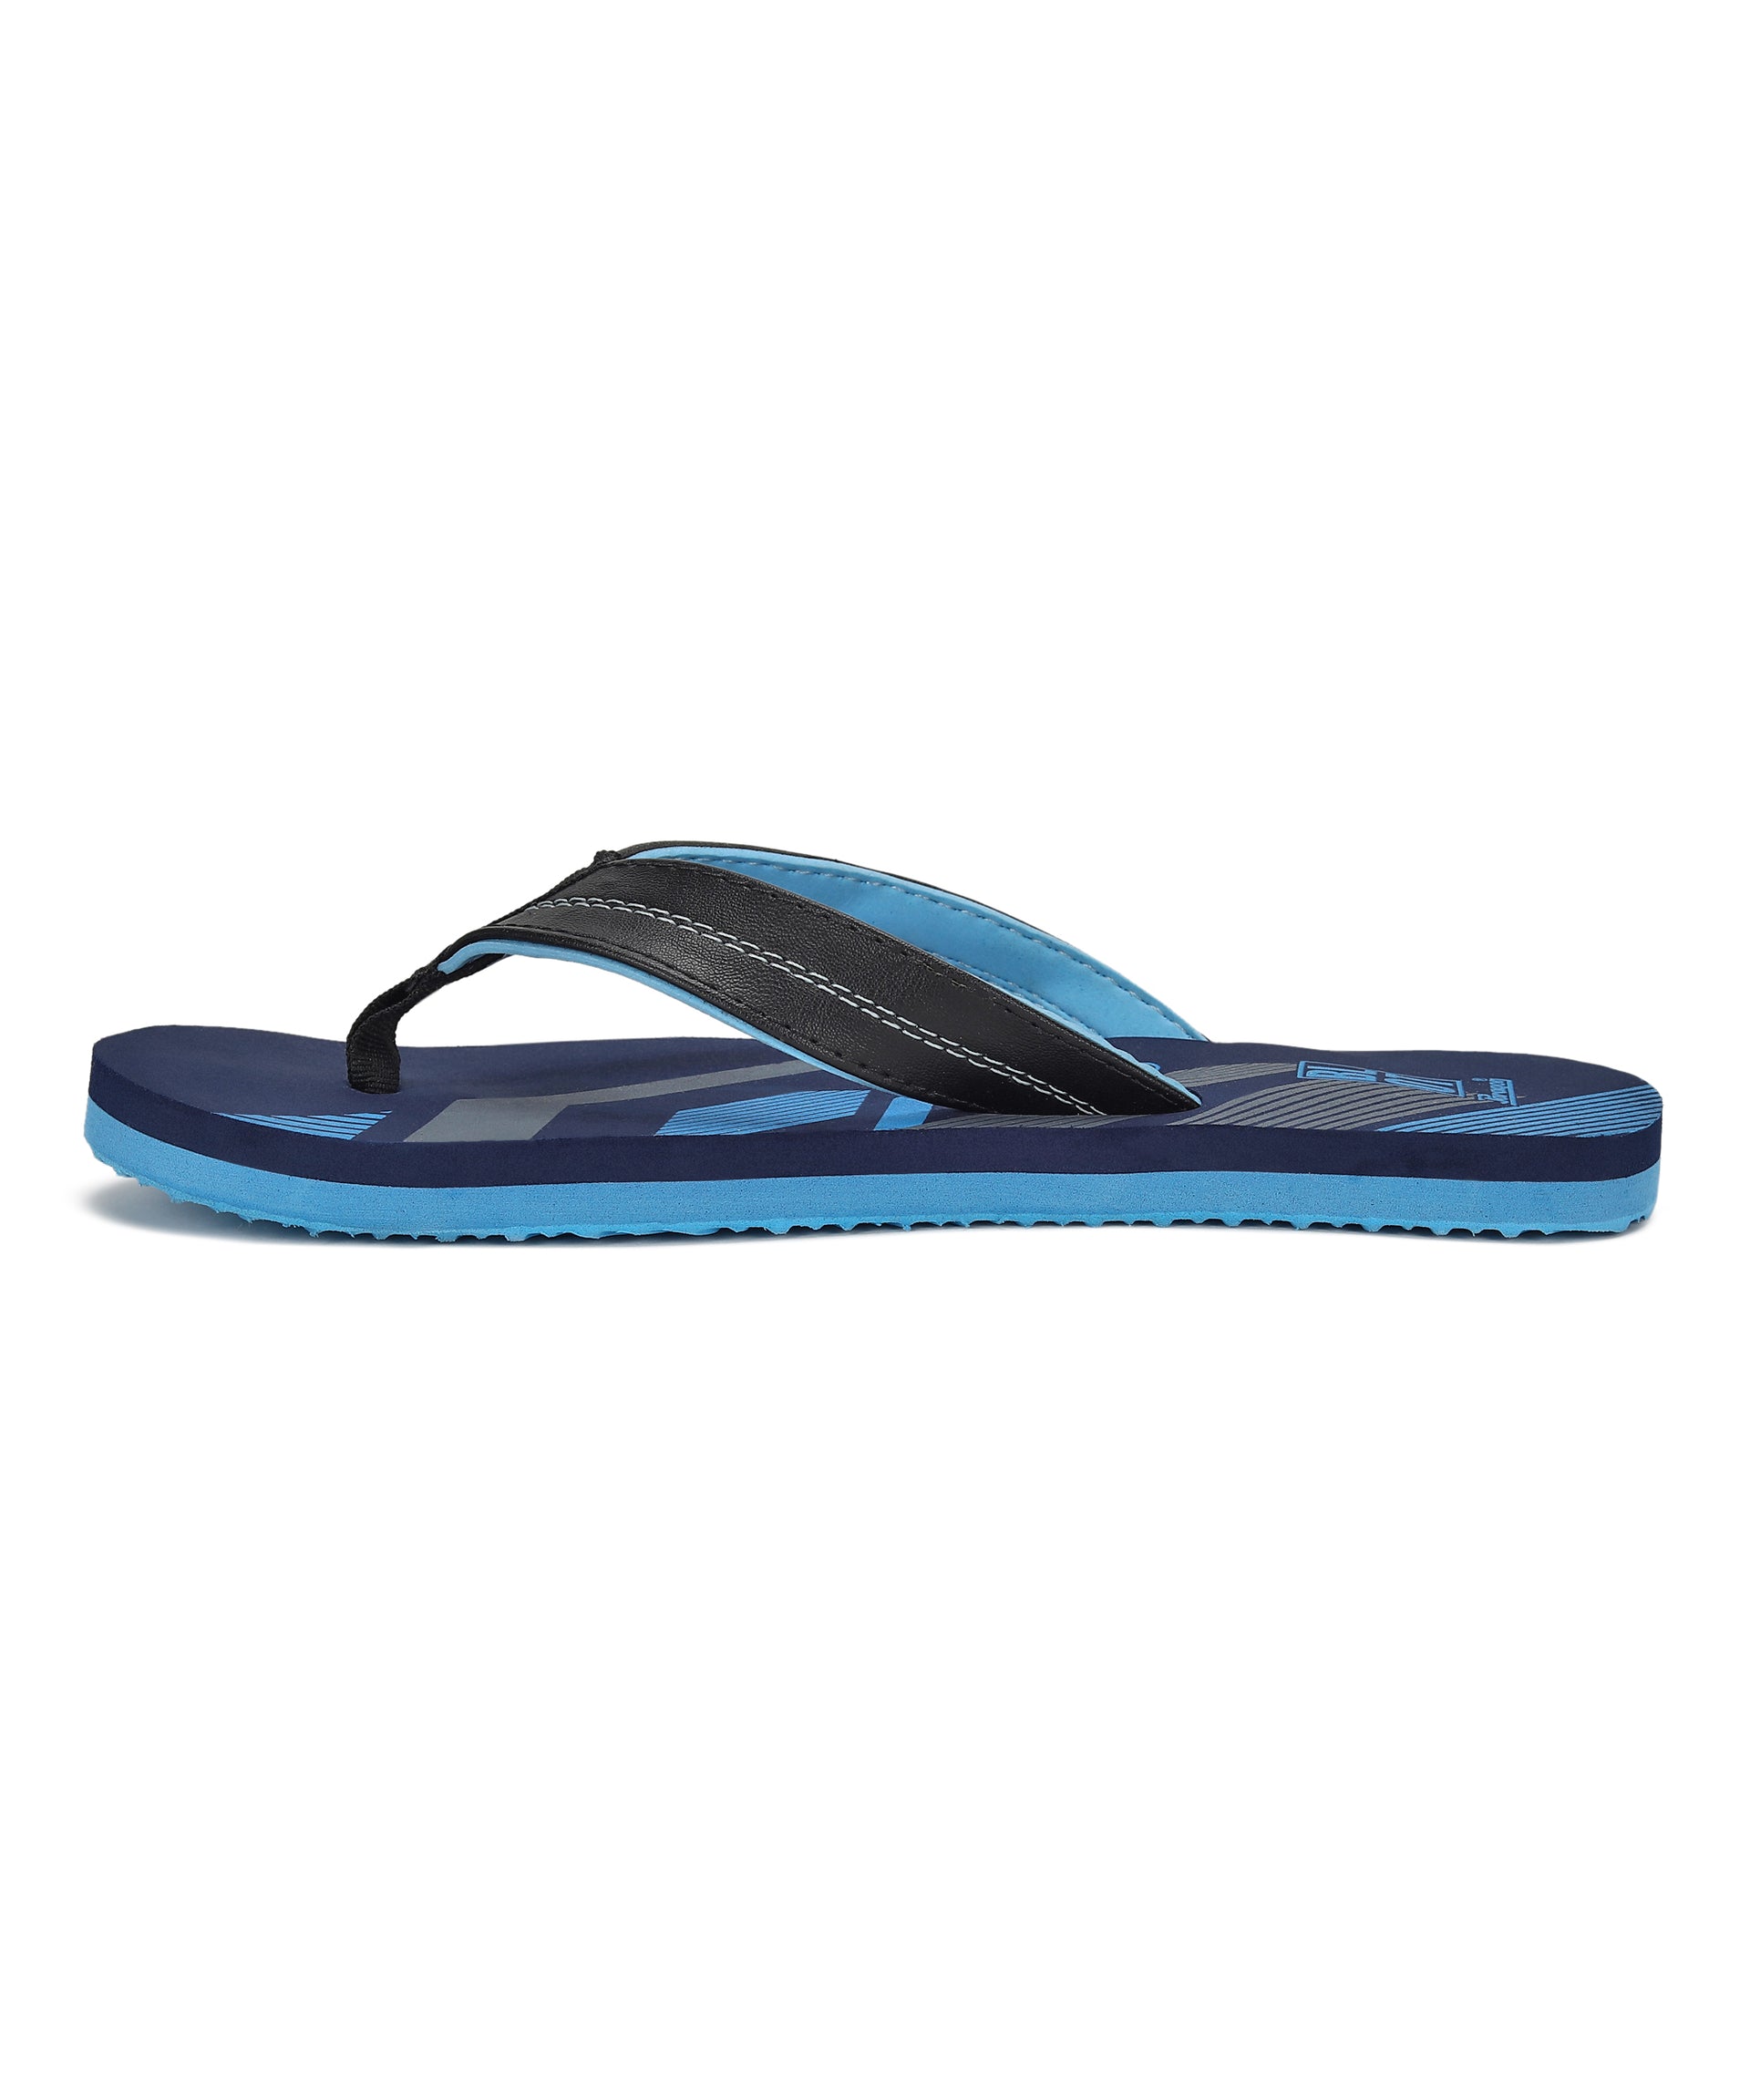 Paragon Blot K3306G Men Stylish Lightweight Flipflops | Casual &amp; Comfortable Daily-wear Slippers for Indoor &amp; Outdoor | For Everyday Use